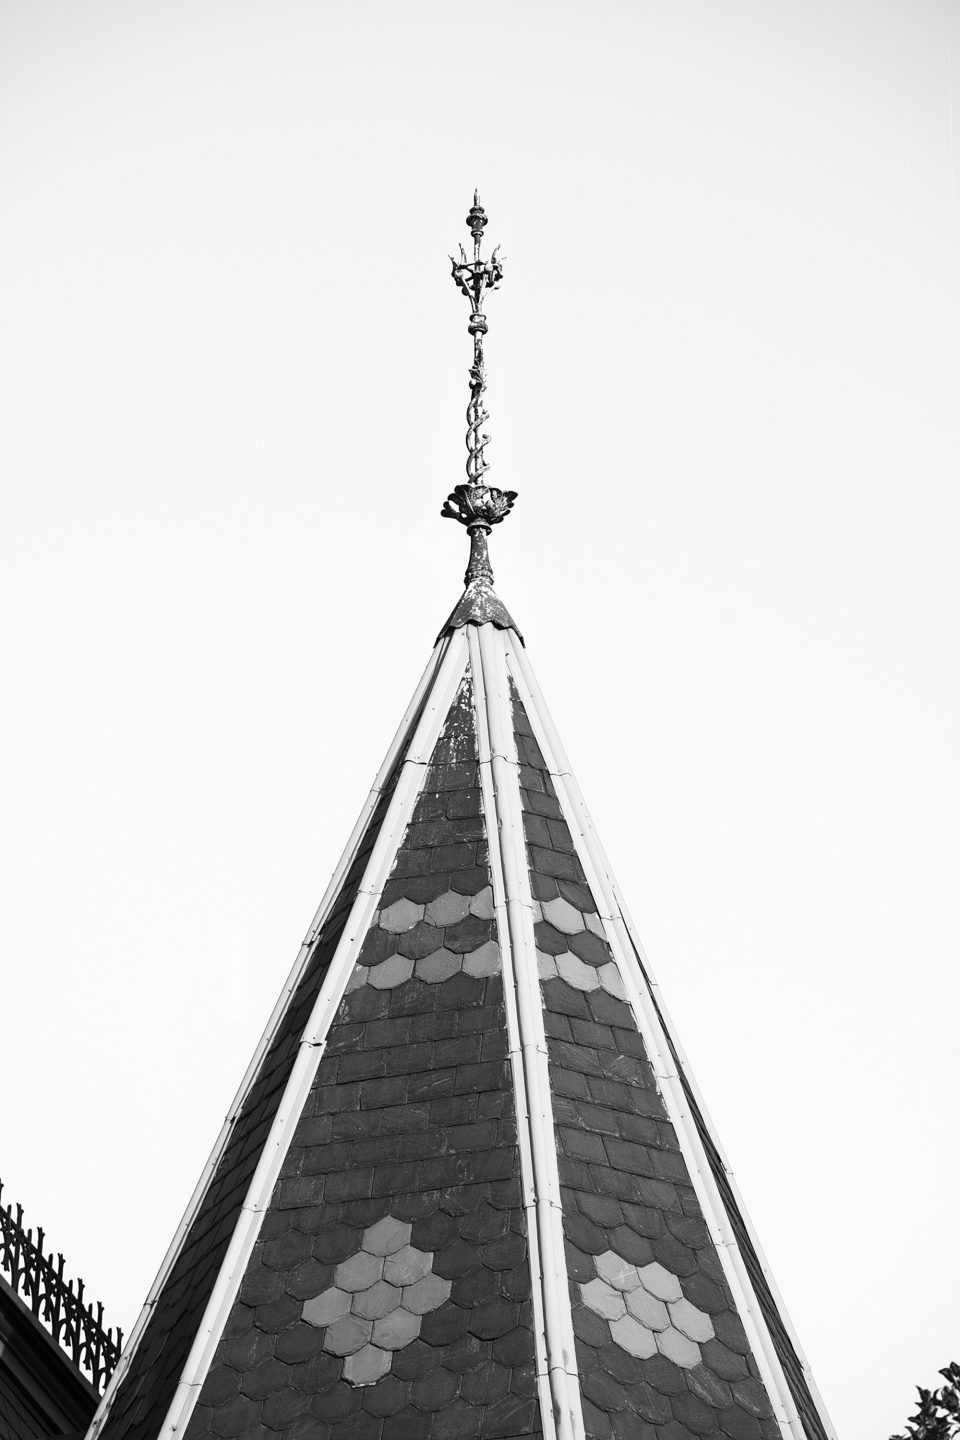 Spire on a Victorian House - Black and White Photograph by Keith Dotson. Click here to buy a fine art print.